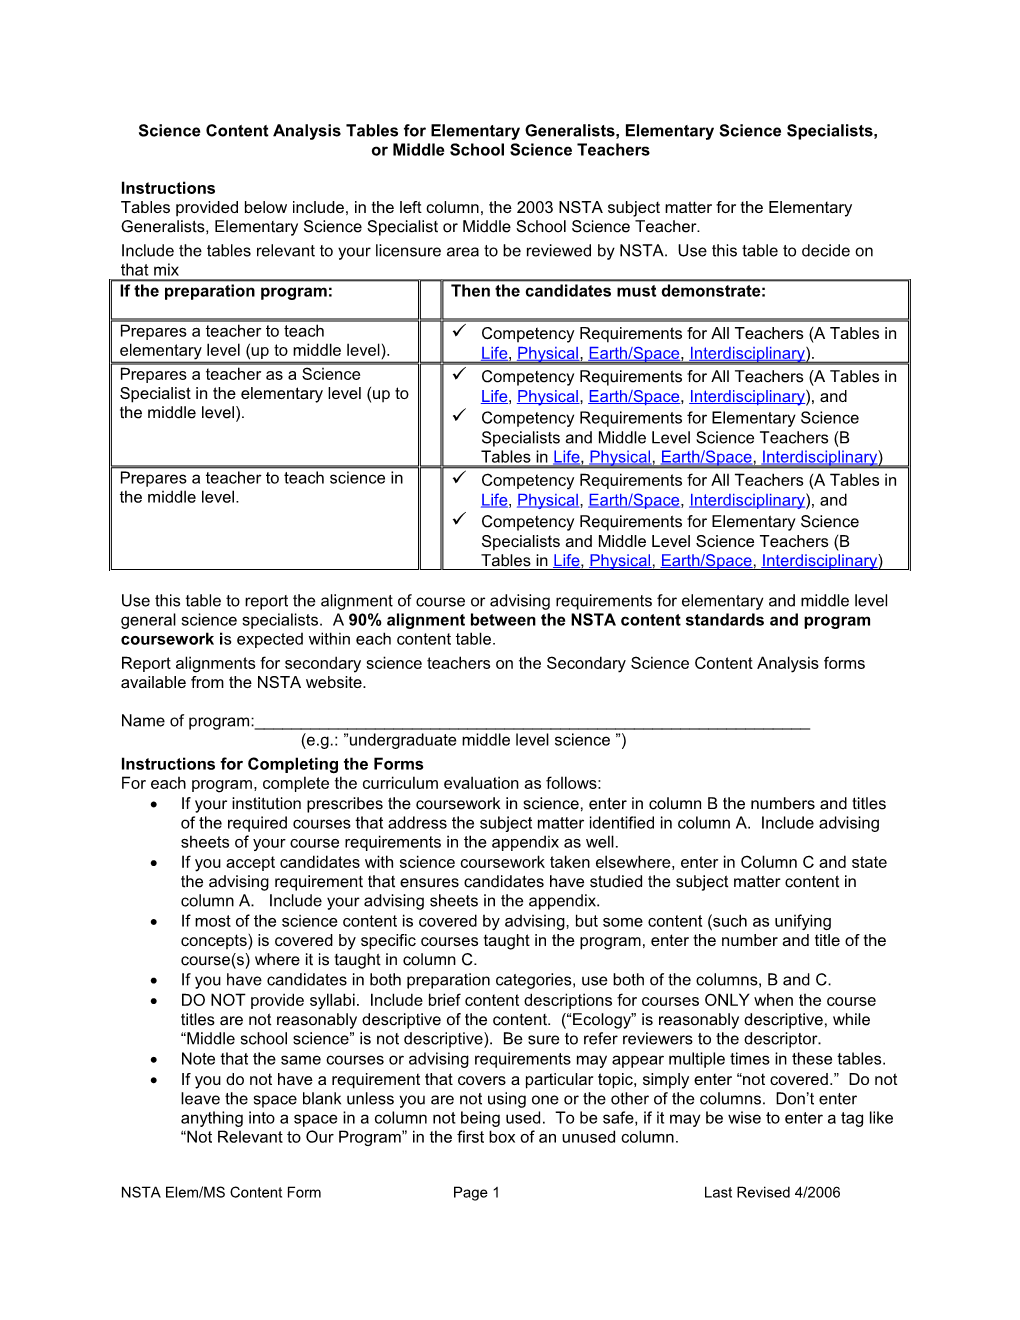 Science Content Analysis Tables for Elementary/Middle School Specialists and General Science